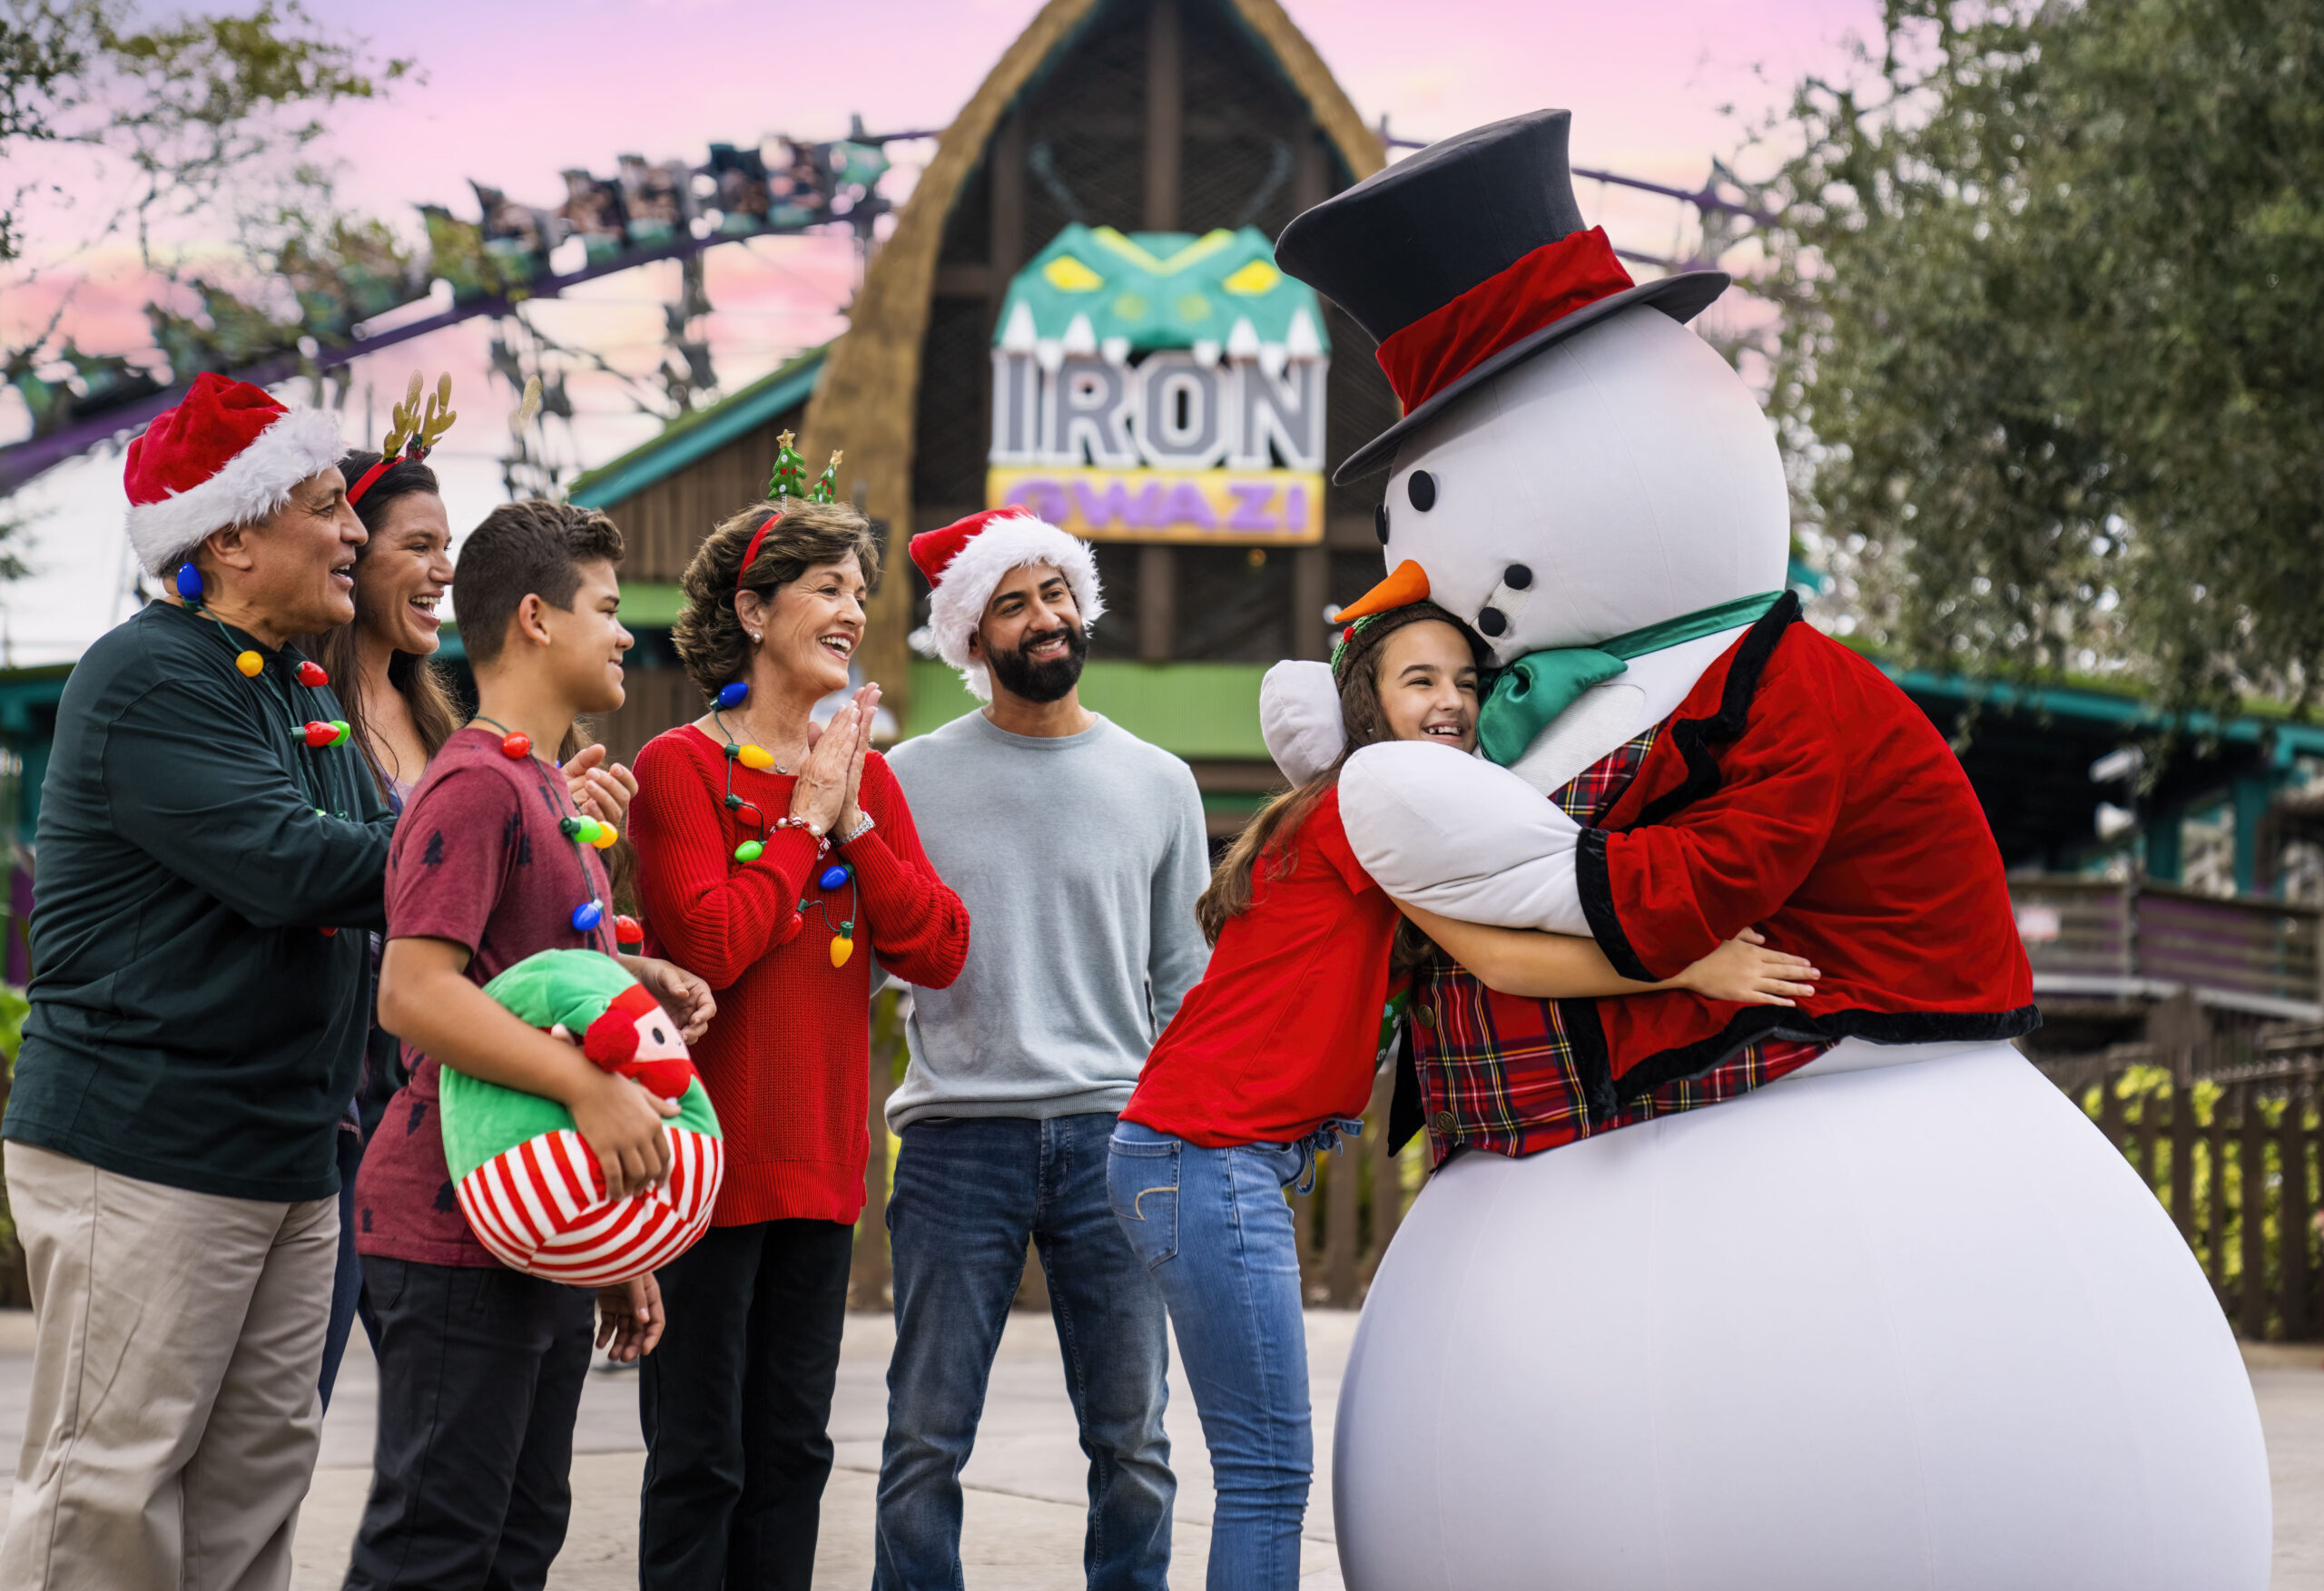 Busch Gardens will host 58 days of Christmas celebrations in Tampa Bay